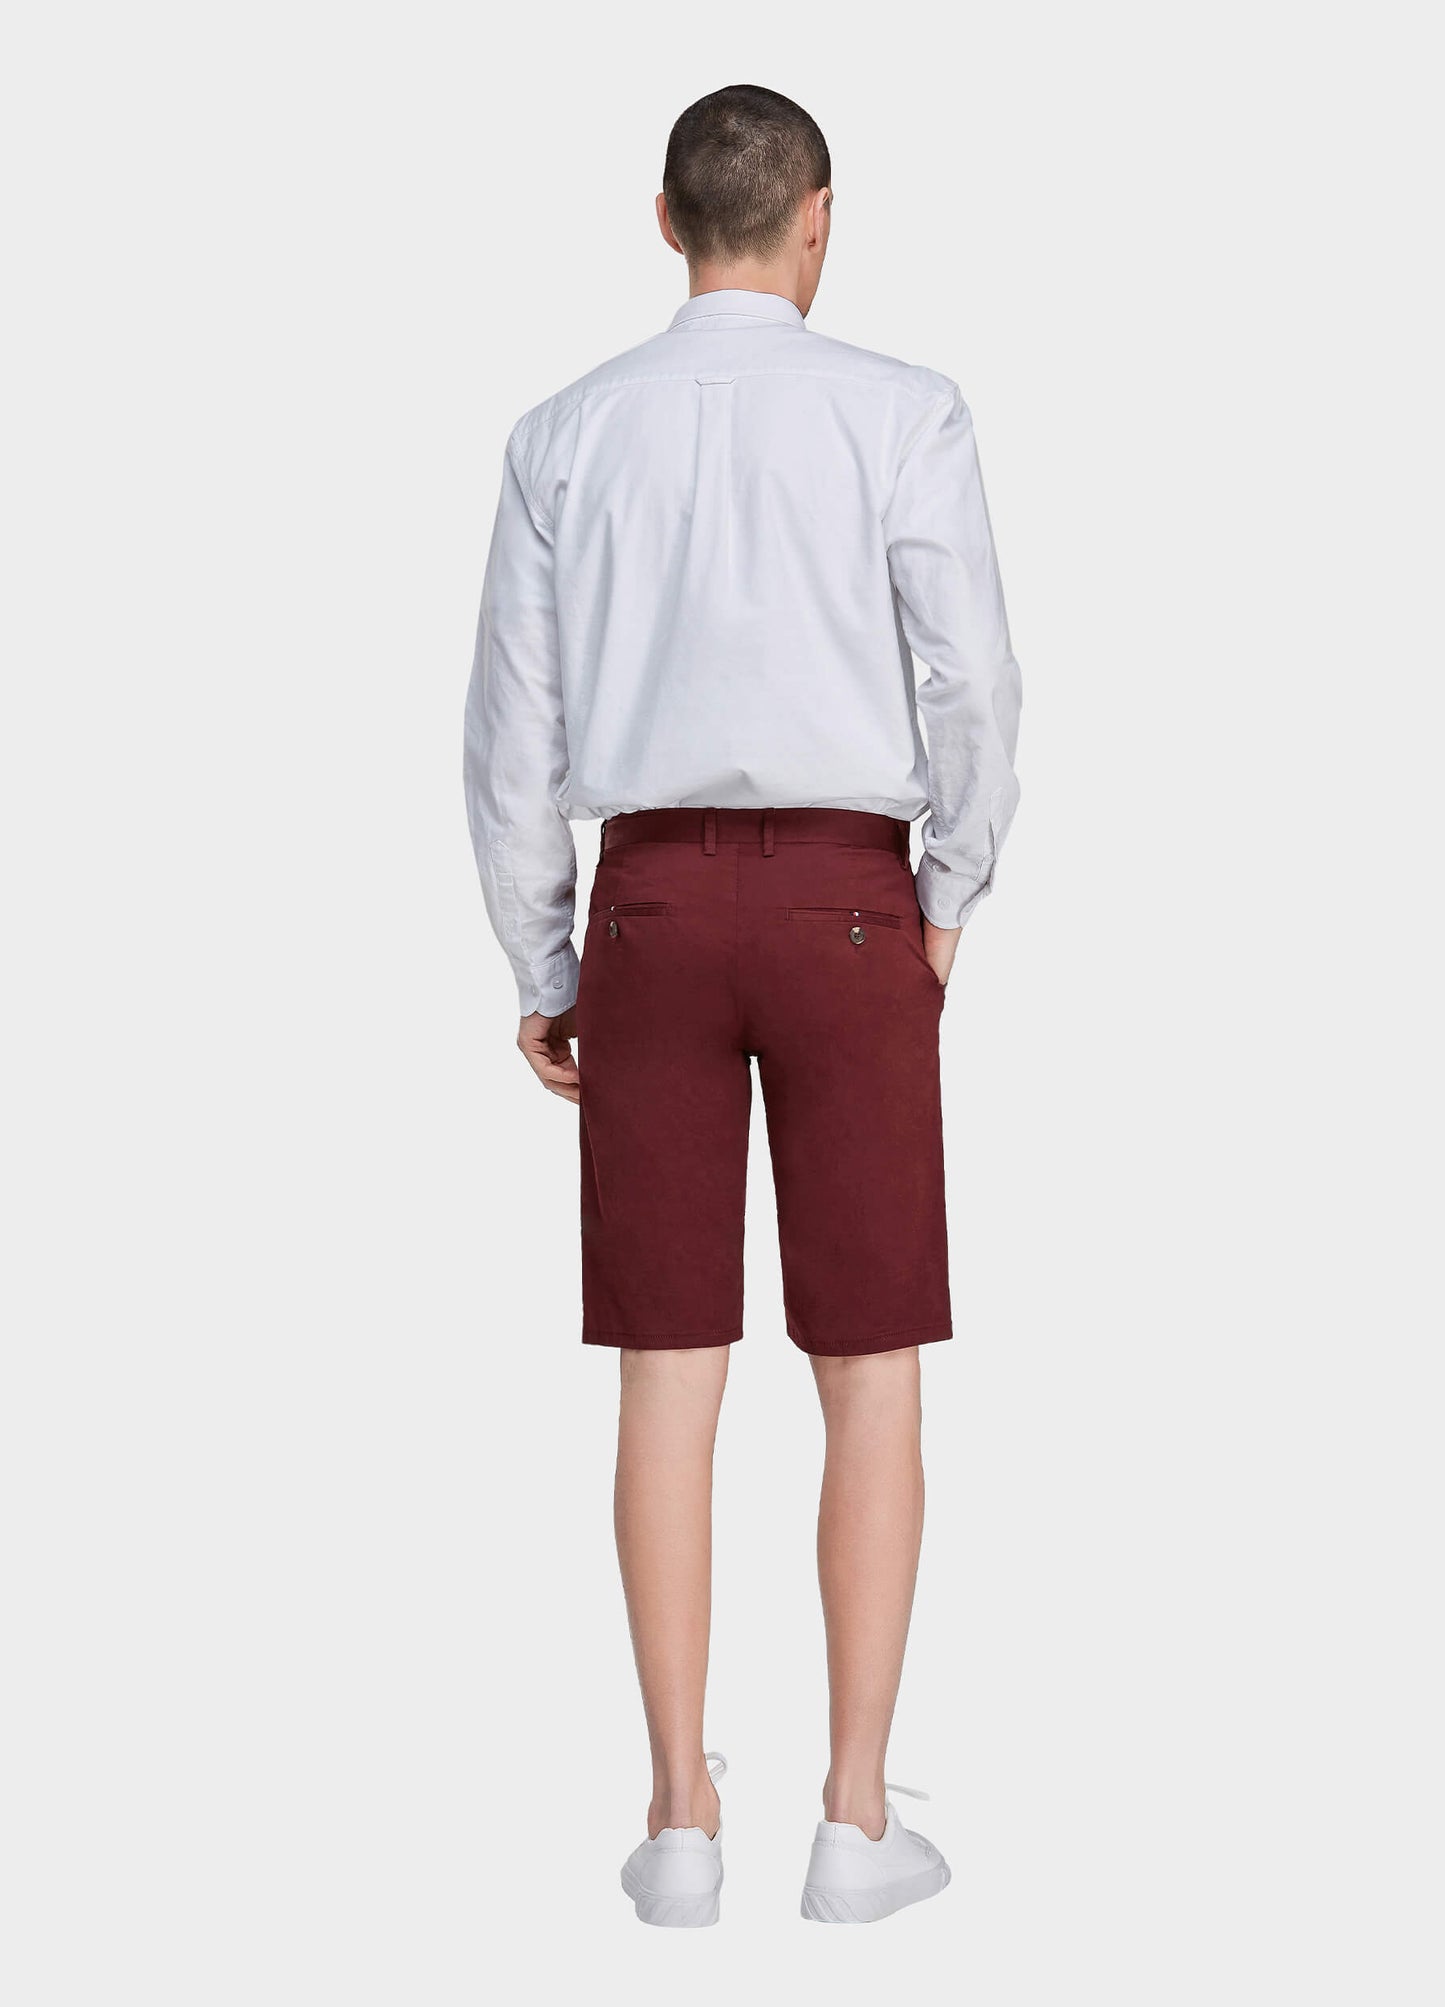 Men's Casual Button Closure Zipper Elasticity Solid Shorts with Slant Pocket-Wine Red back view